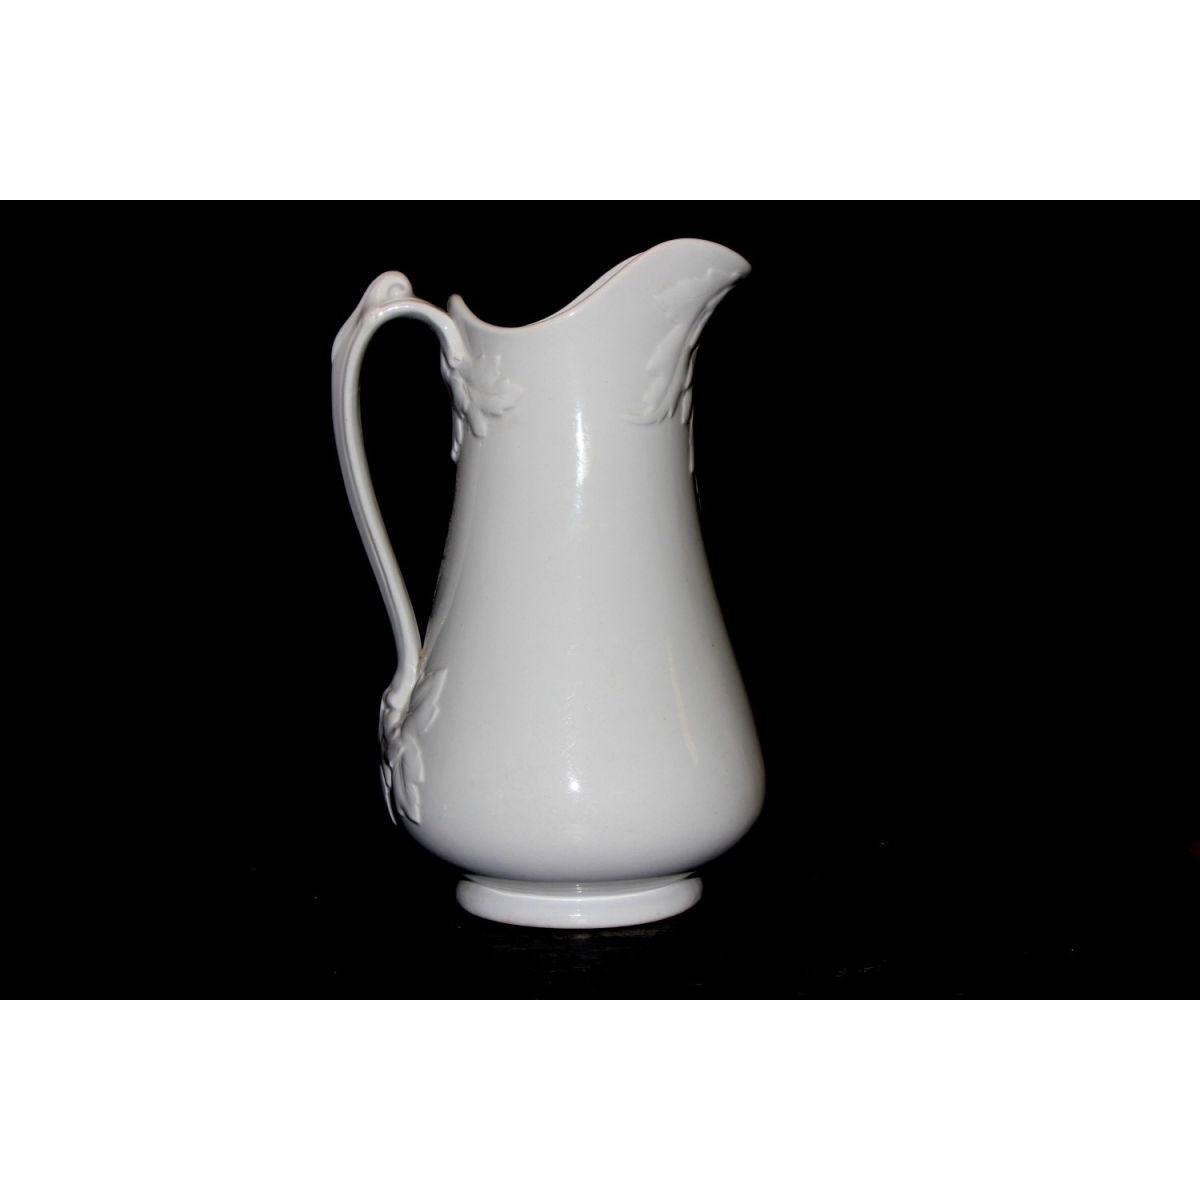 Unusual Tall Slender Skinny Ironstone Ewer with Exaggerated Leaf